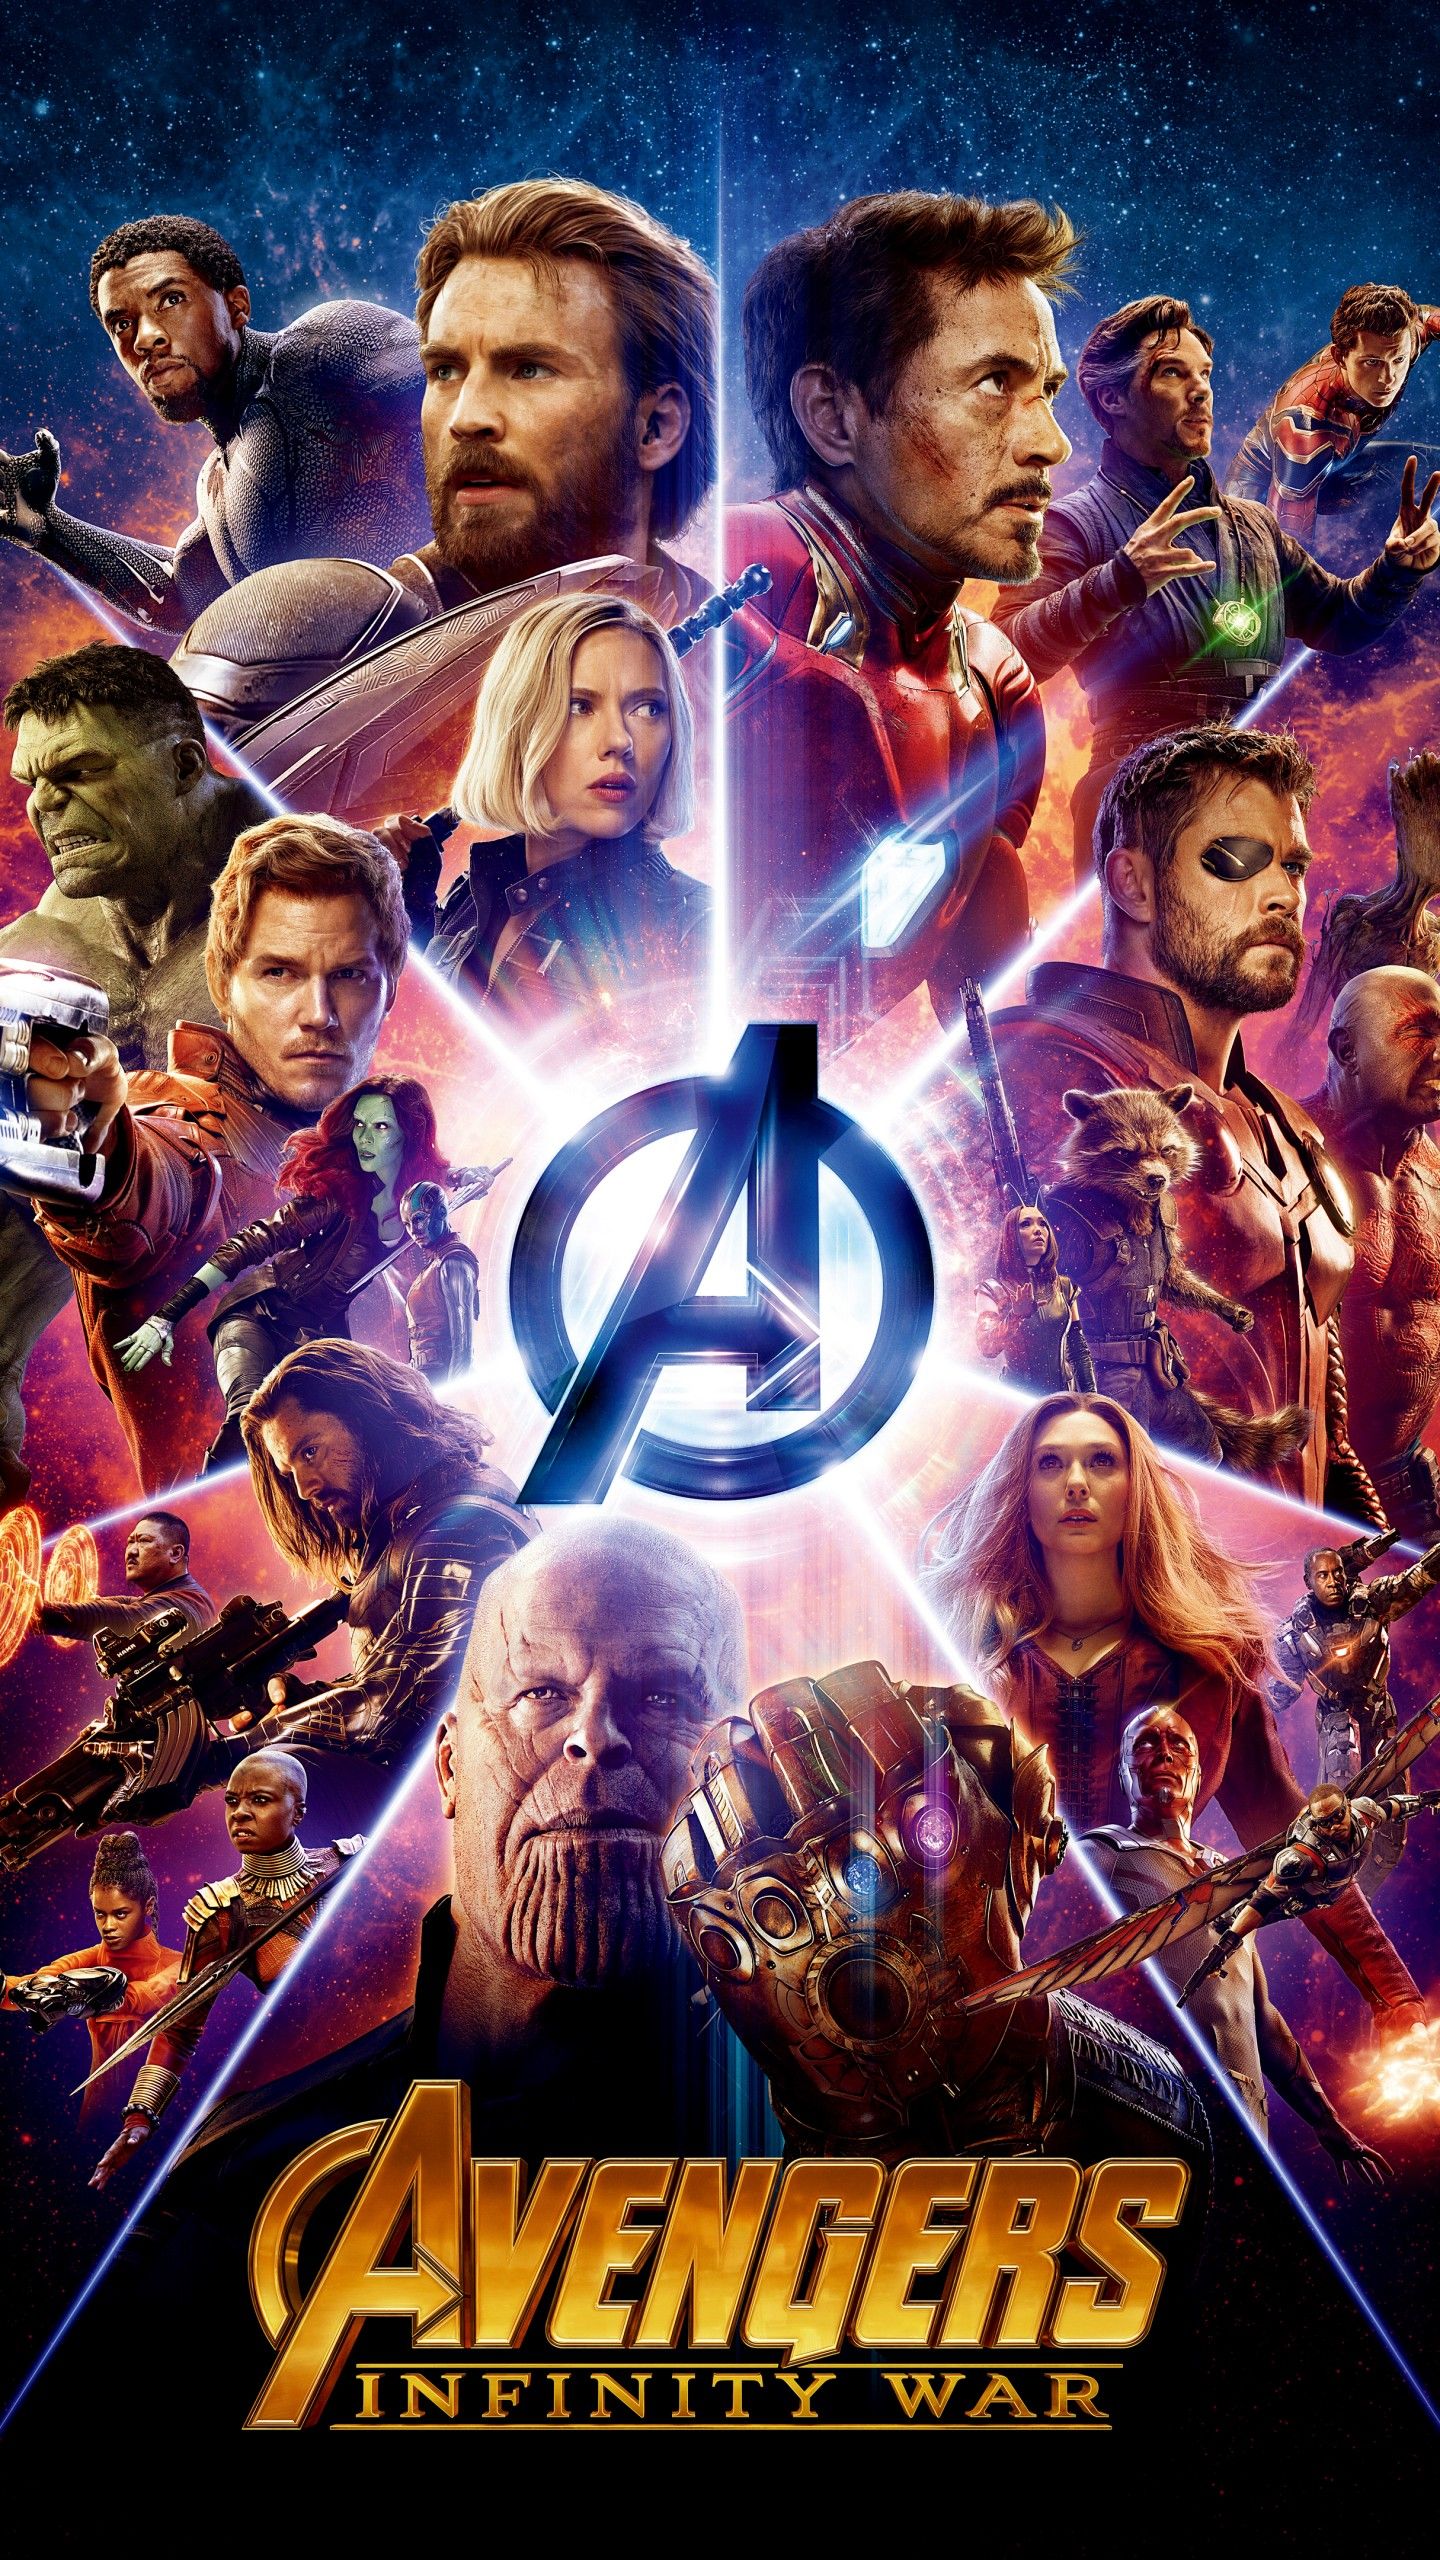 Wallpaper Avengers: Infinity War, 4K, 8K, Movies,. Wallpaper for iPhone, Android, Mobile and Desktop